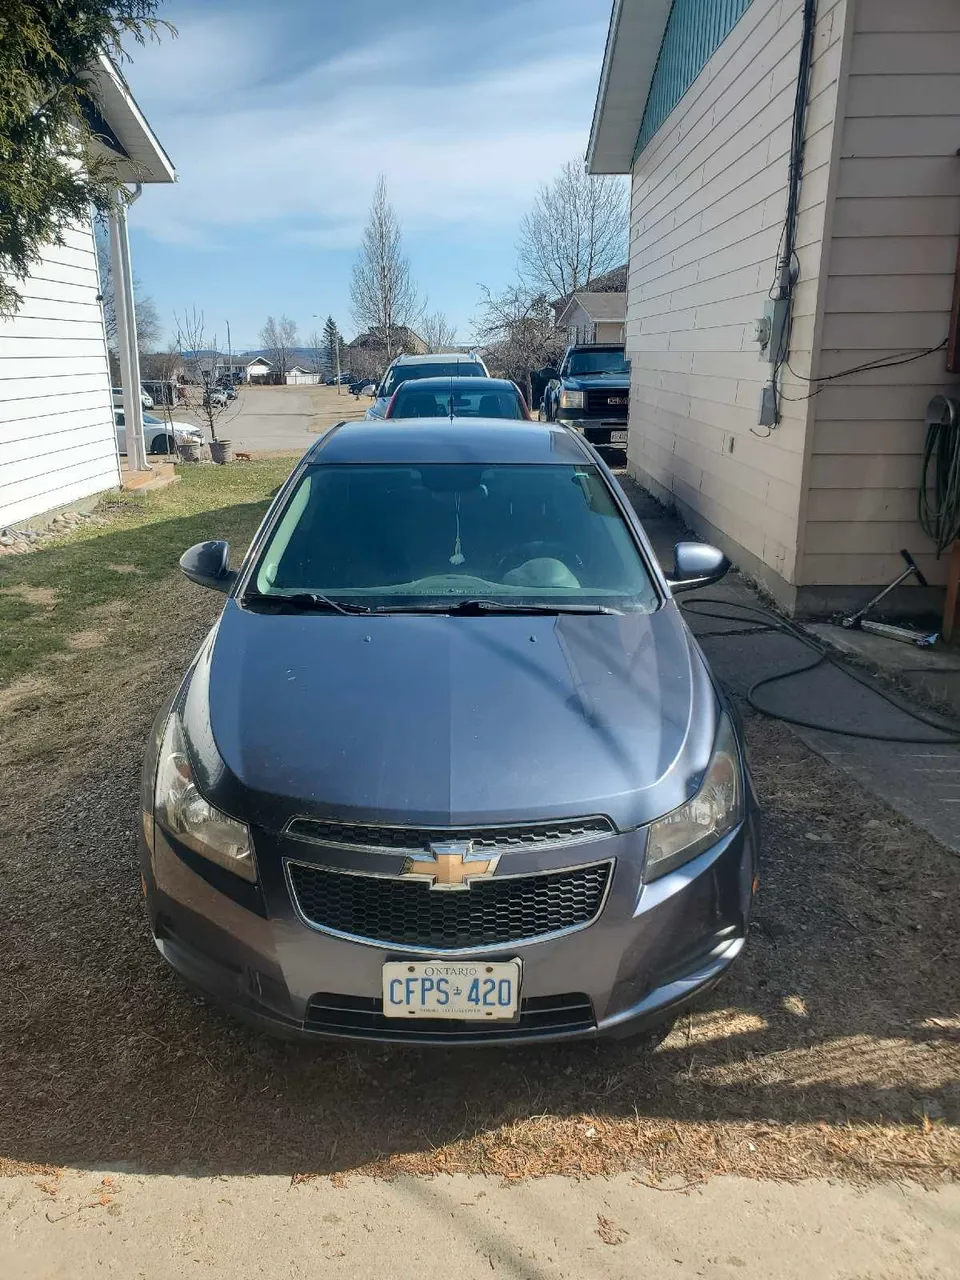 2013 chevy cruze parts or fix